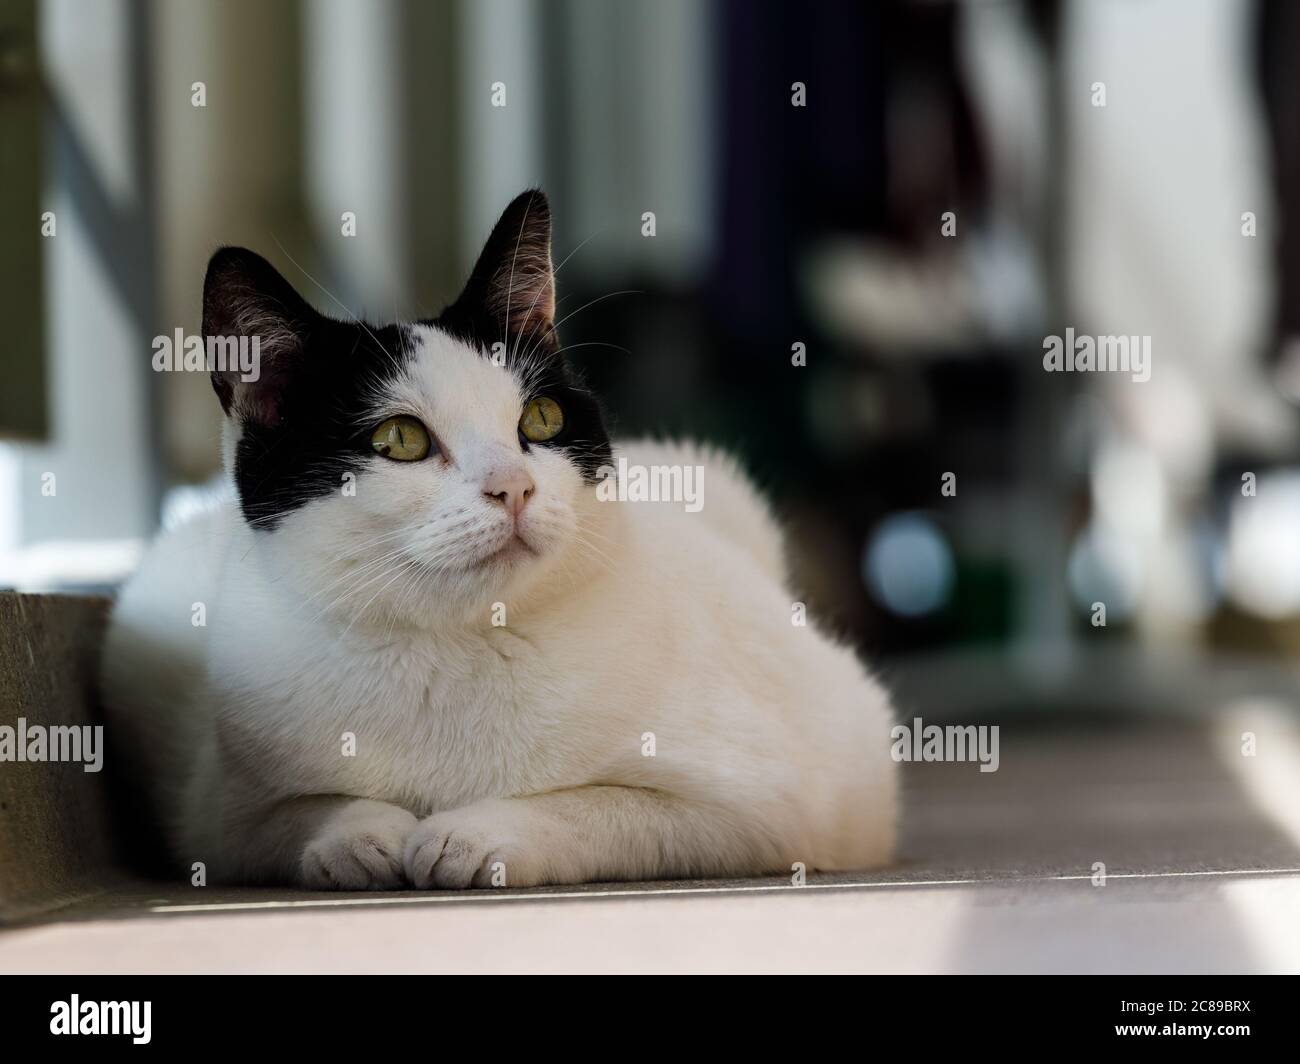 Cat noticed a movement and looks up to see what it is. Stock Photo